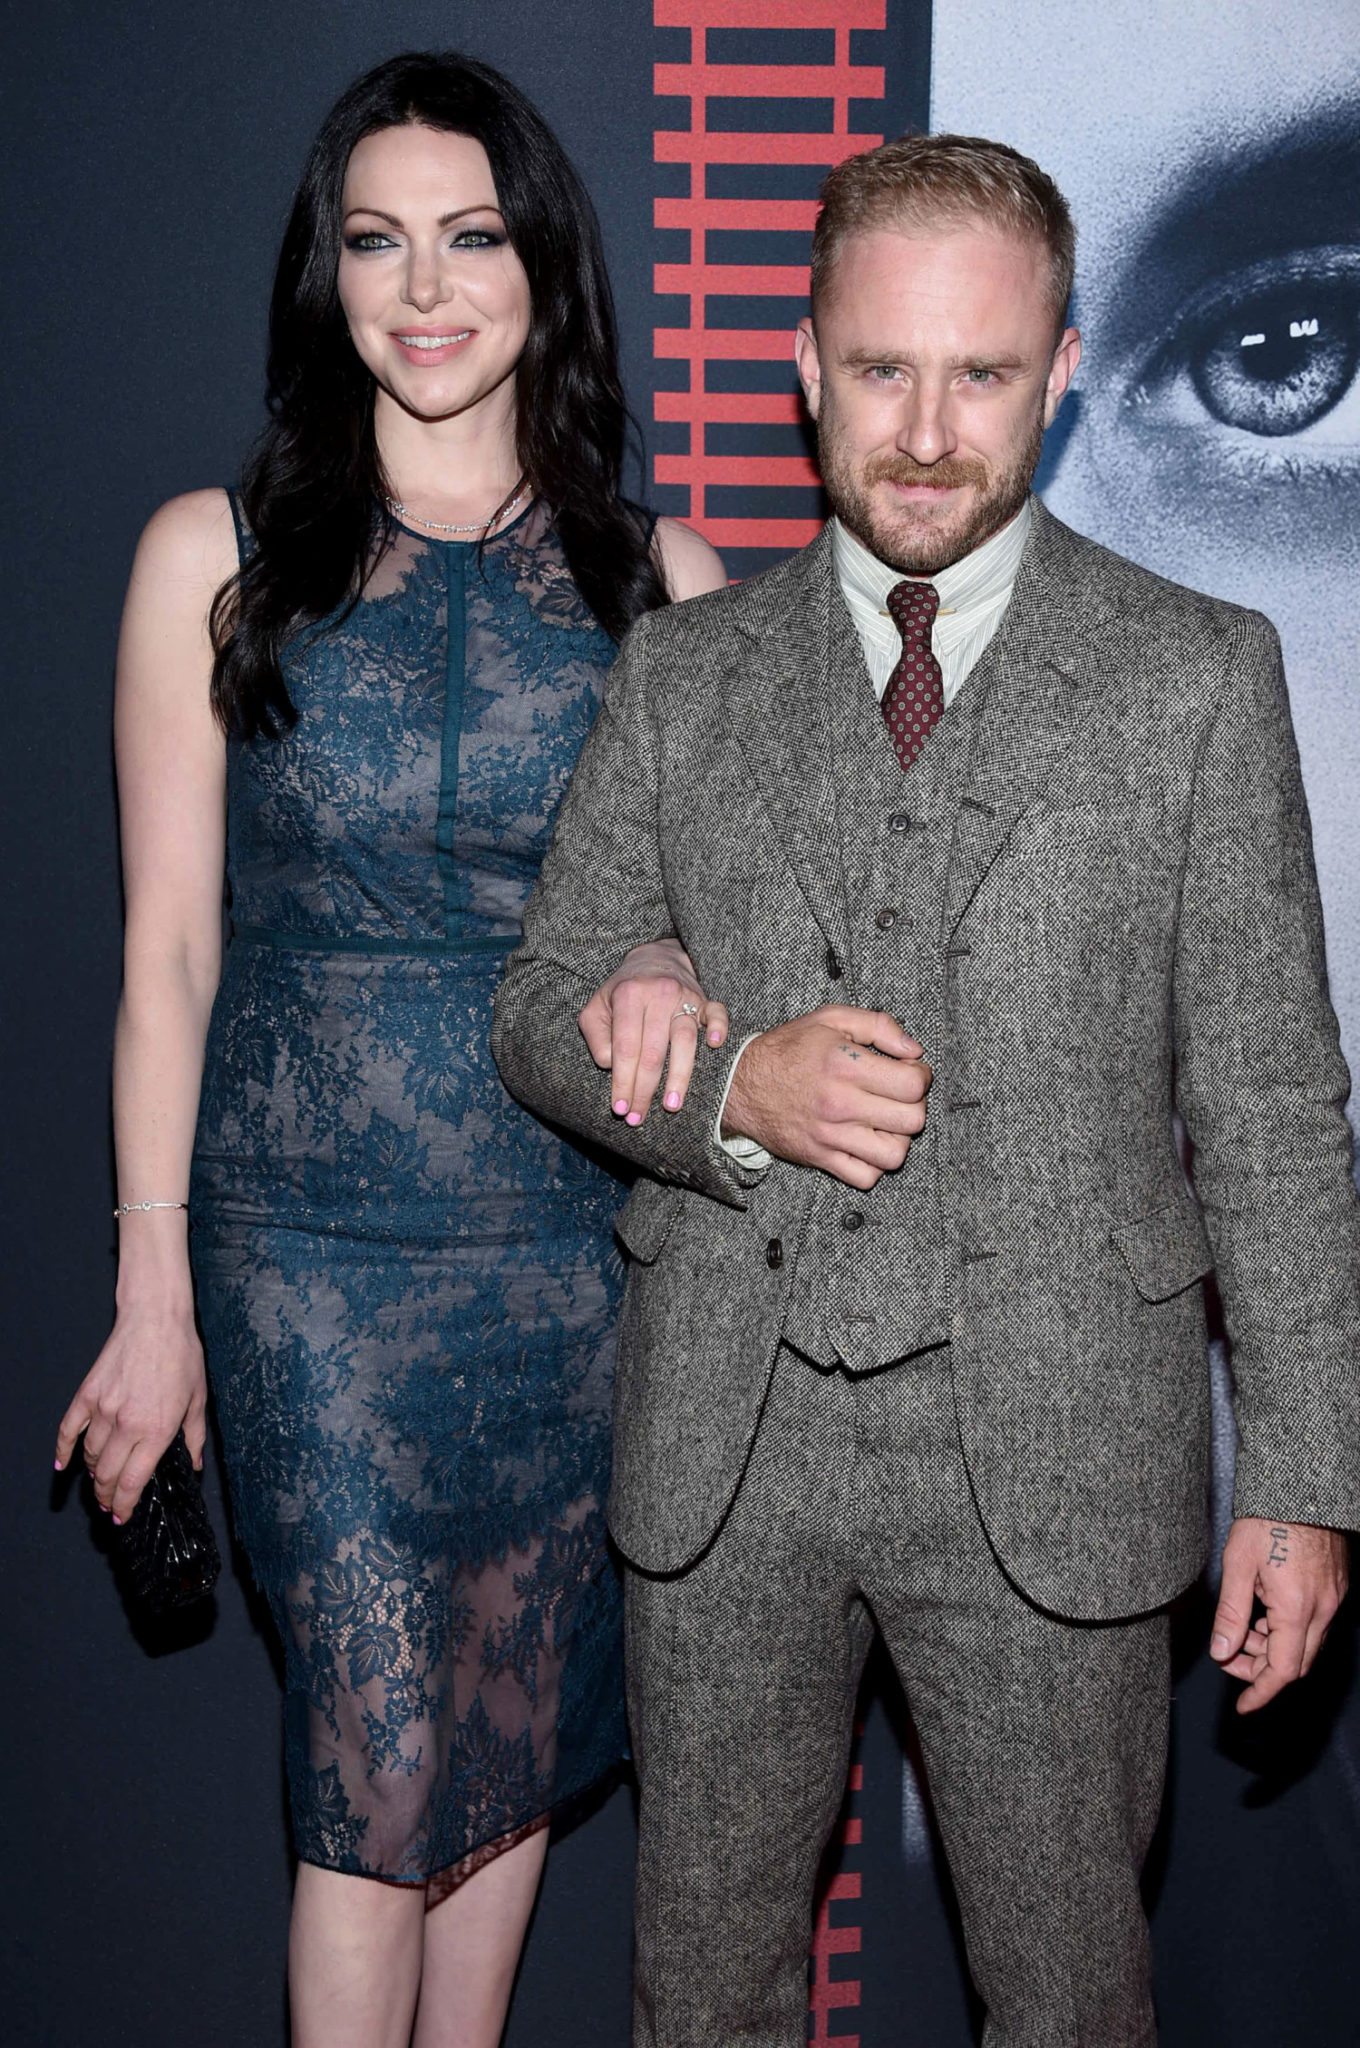 NEW YORK, NY - OCTOBER 04: Laura Prepon (L) and Ben Foster attend the "The Girl On The Train" New York Premiere at Regal E-Walk Stadium 13 on October 4, 2016 in New York City. (Photo by Dimitrios Kambouris/Getty Images)